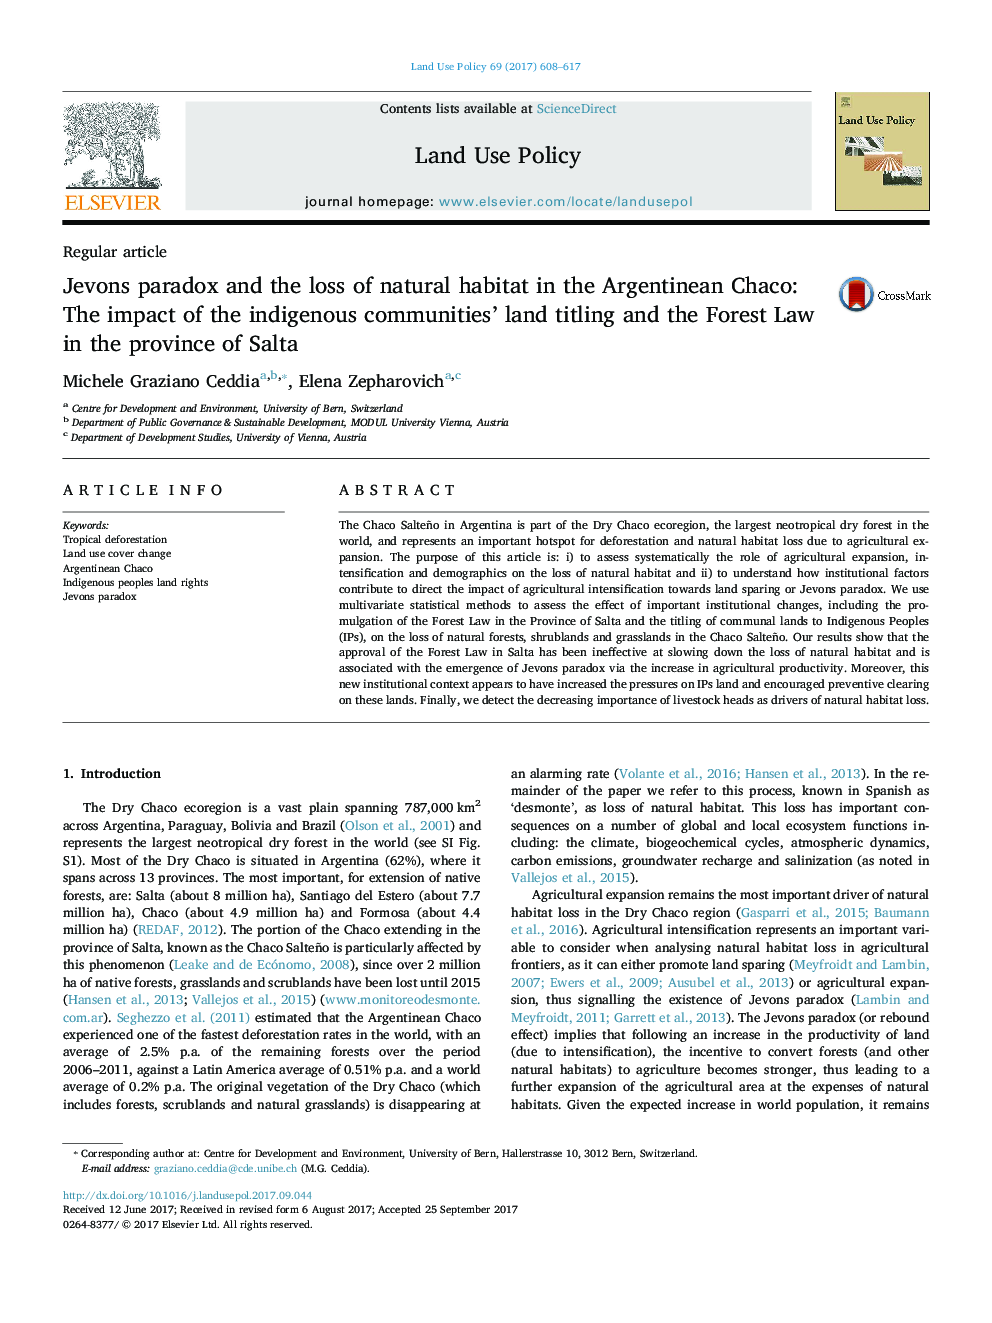 Jevons paradox and the loss of natural habitat in the Argentinean Chaco: The impact of the indigenous communities' land titling and the Forest Law in the province of Salta